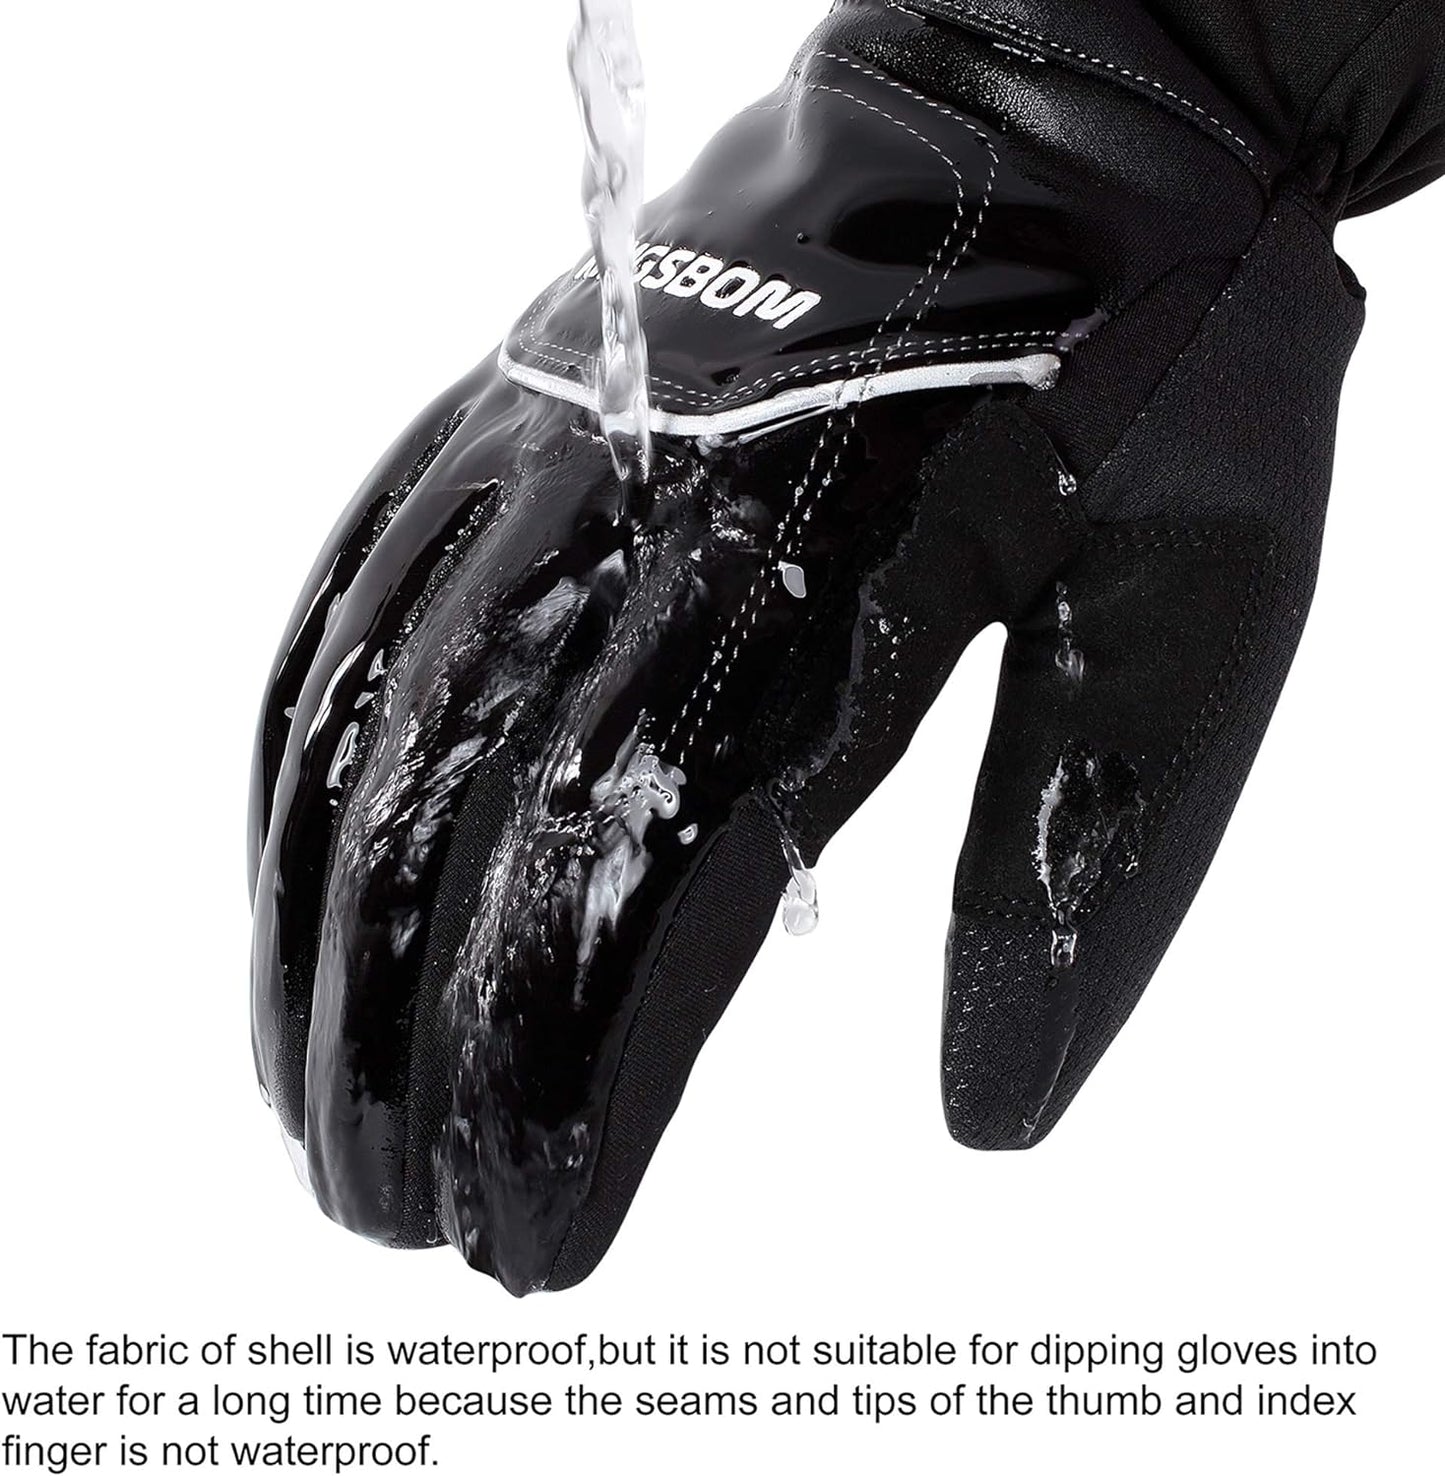 -40F° Waterproof & Windproof Thermal Gloves - 3M Thinsulate Winter Touch Screen Warm Gloves - for Cycling,Riding,Running,Outdoor Sports - for Women and Men